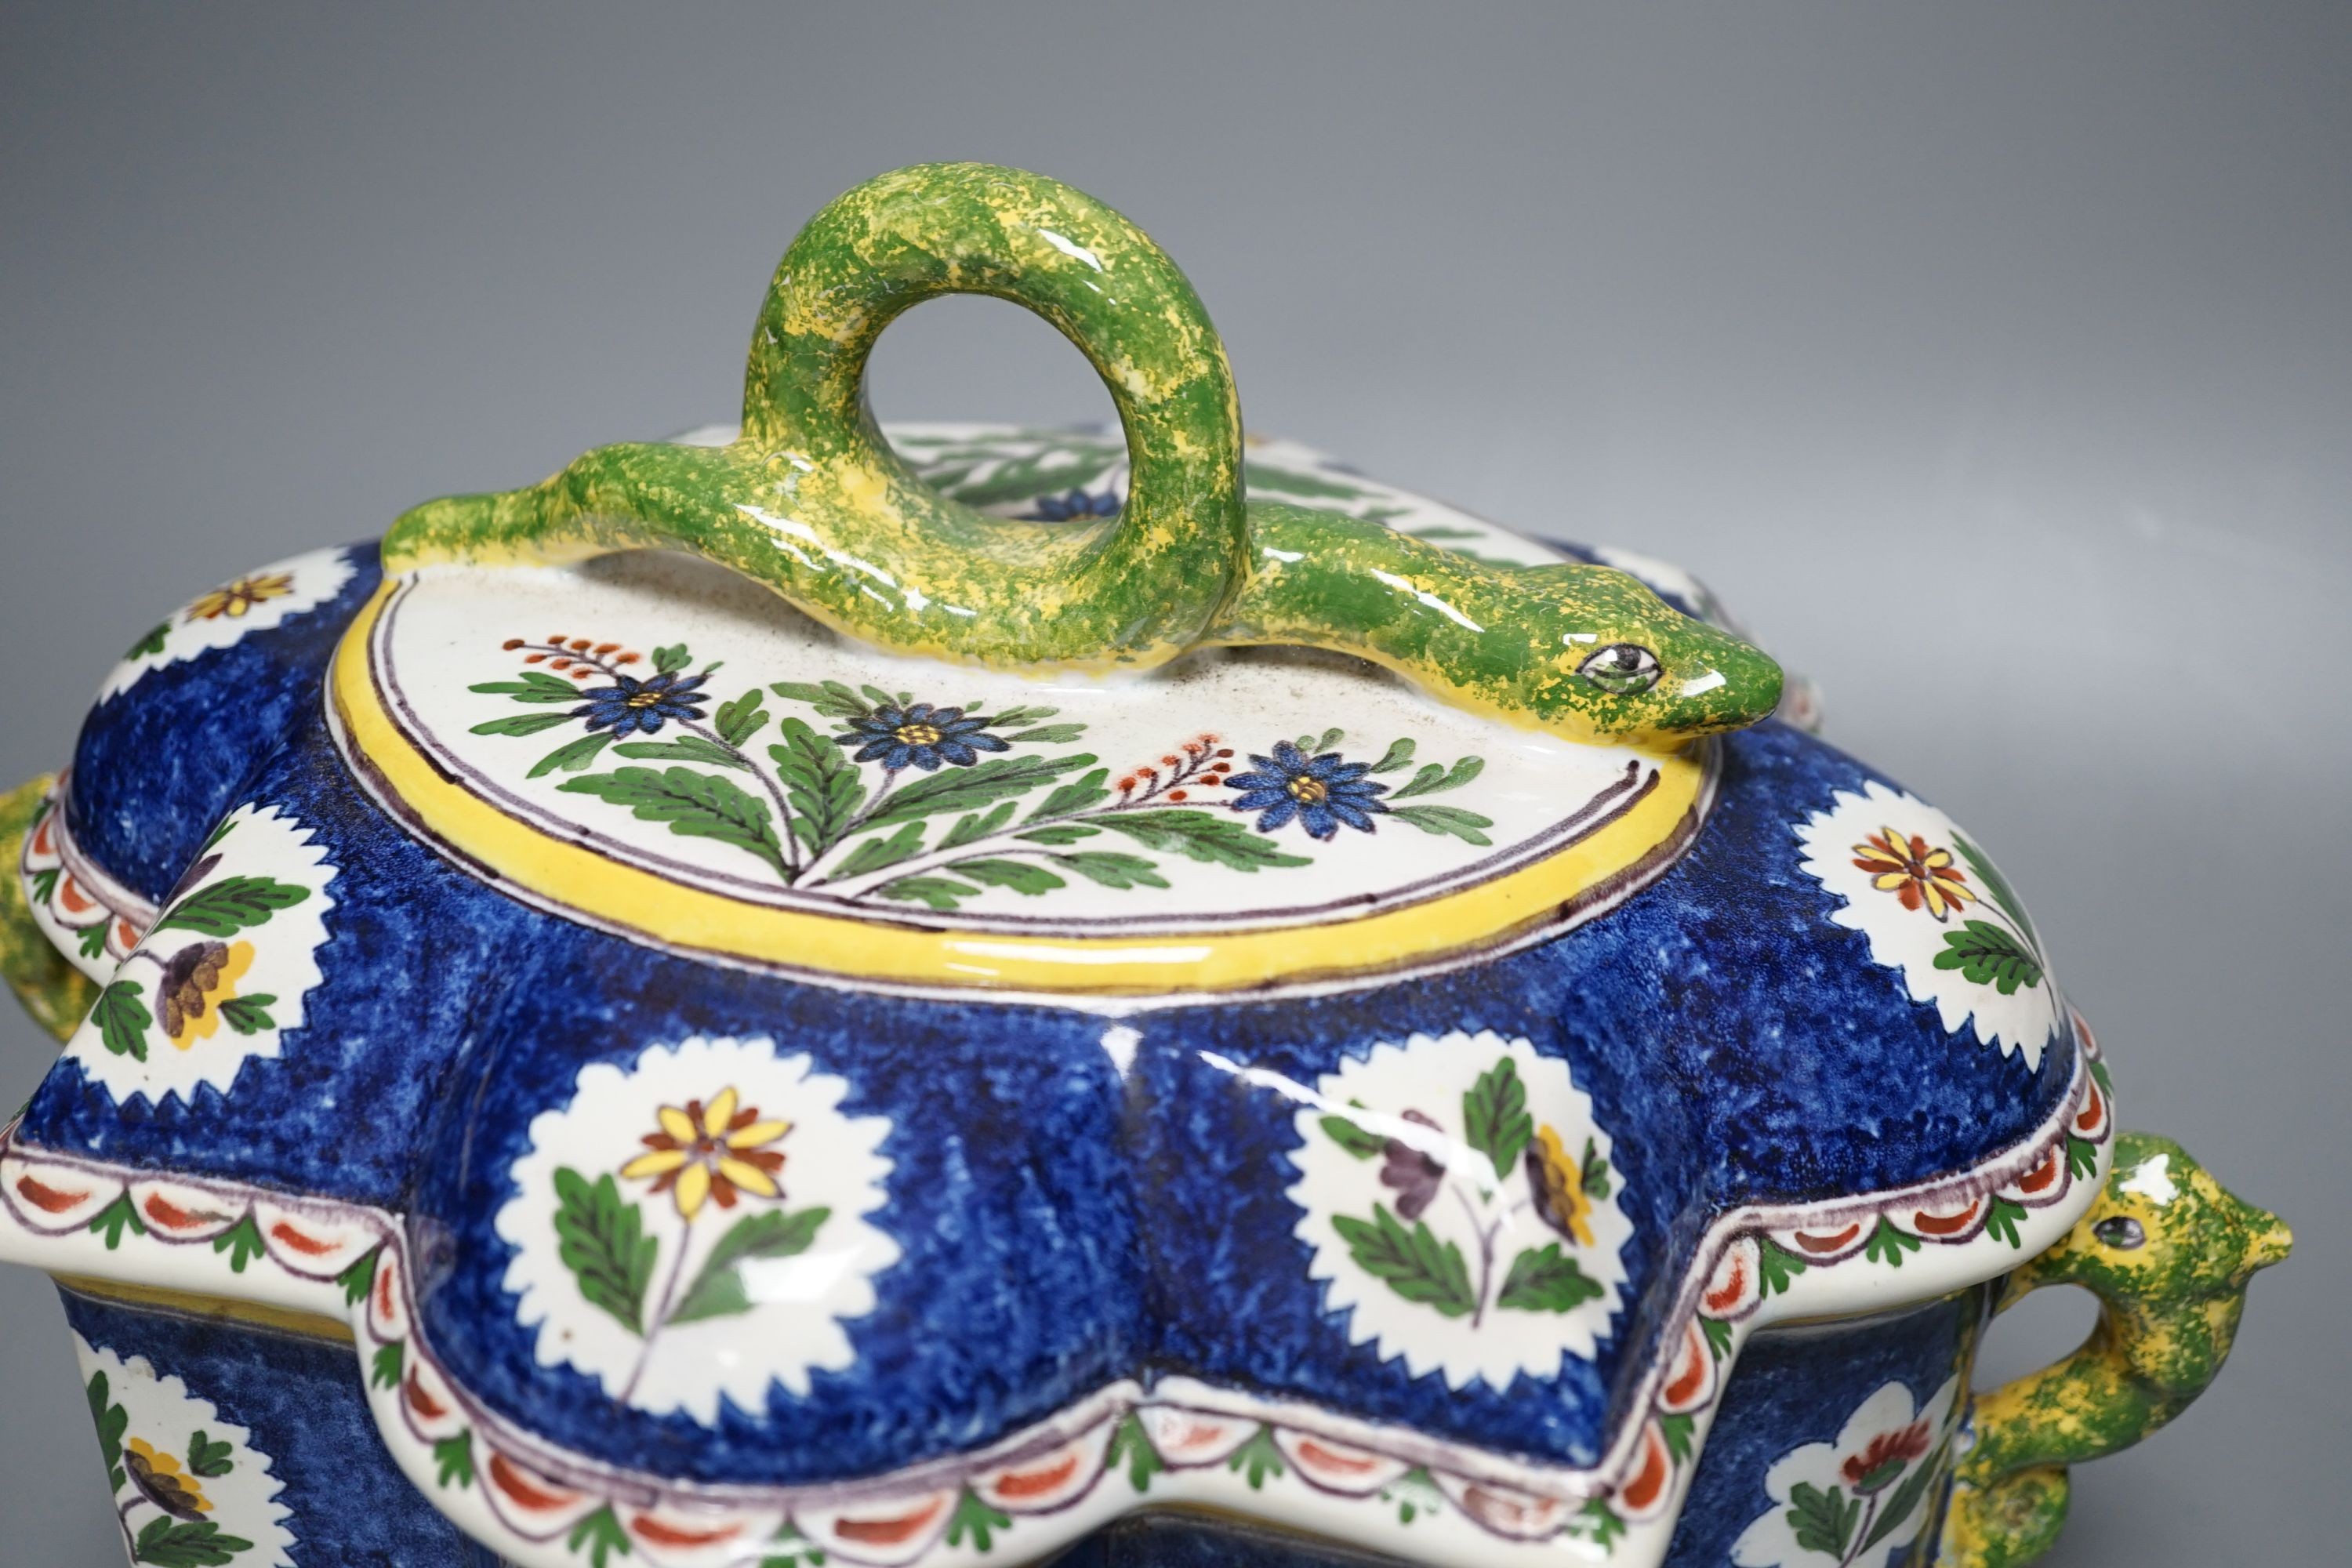 A Belgian Faience casket with ‘snake’ handles 30cm